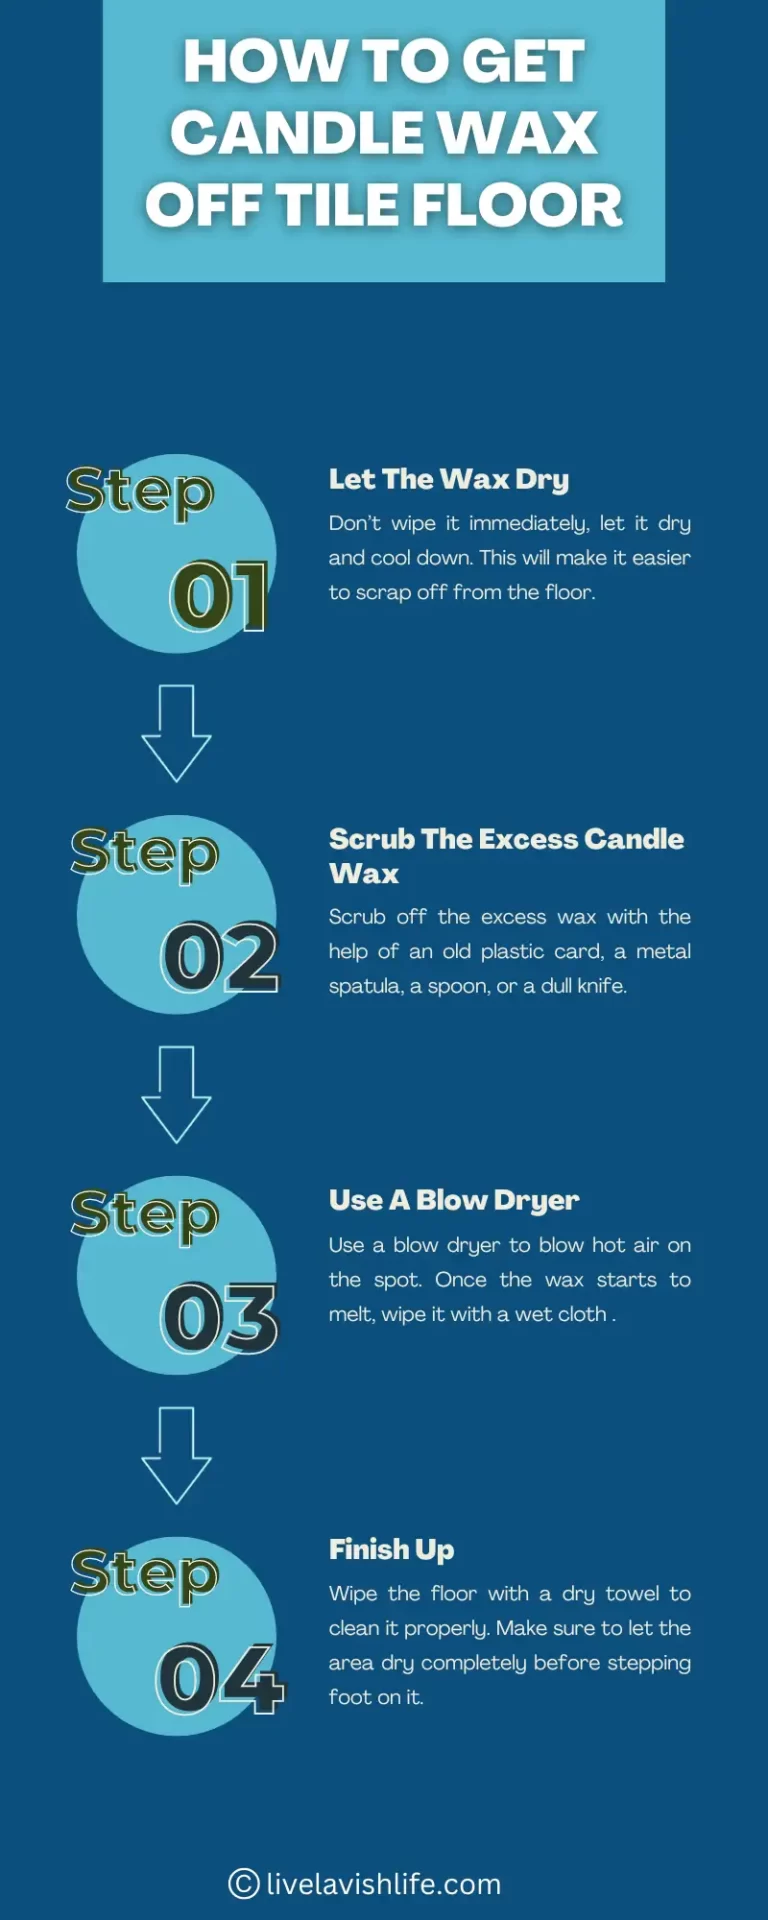 infographic on how to get candle wax off tile floor